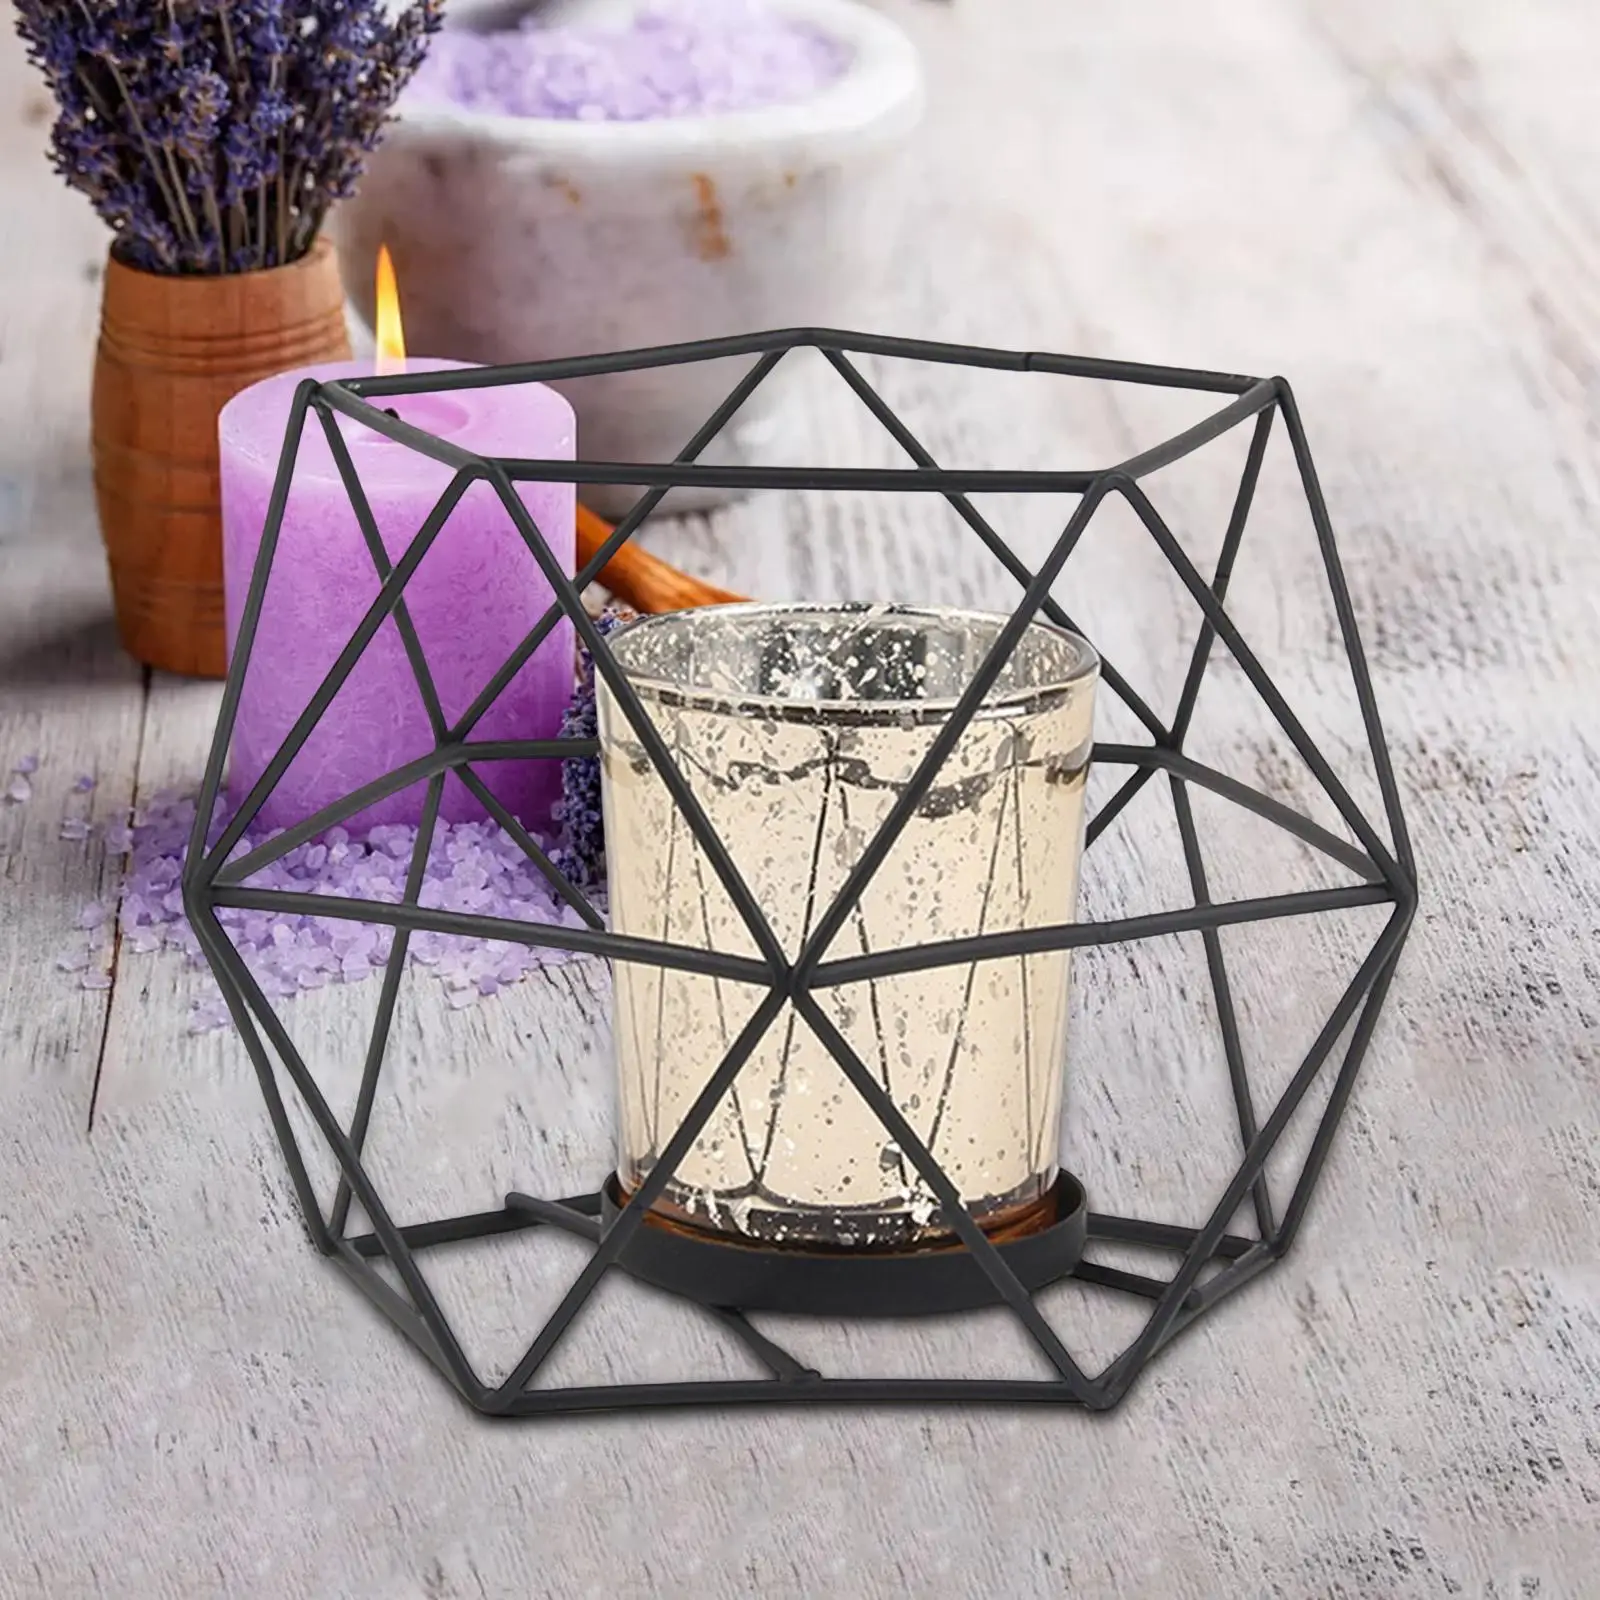 3D Geometric Candle Holder Glass Candle Cup Tealight Metal Candlestick for Wedding Table Centerpieces Christmas Party Decor